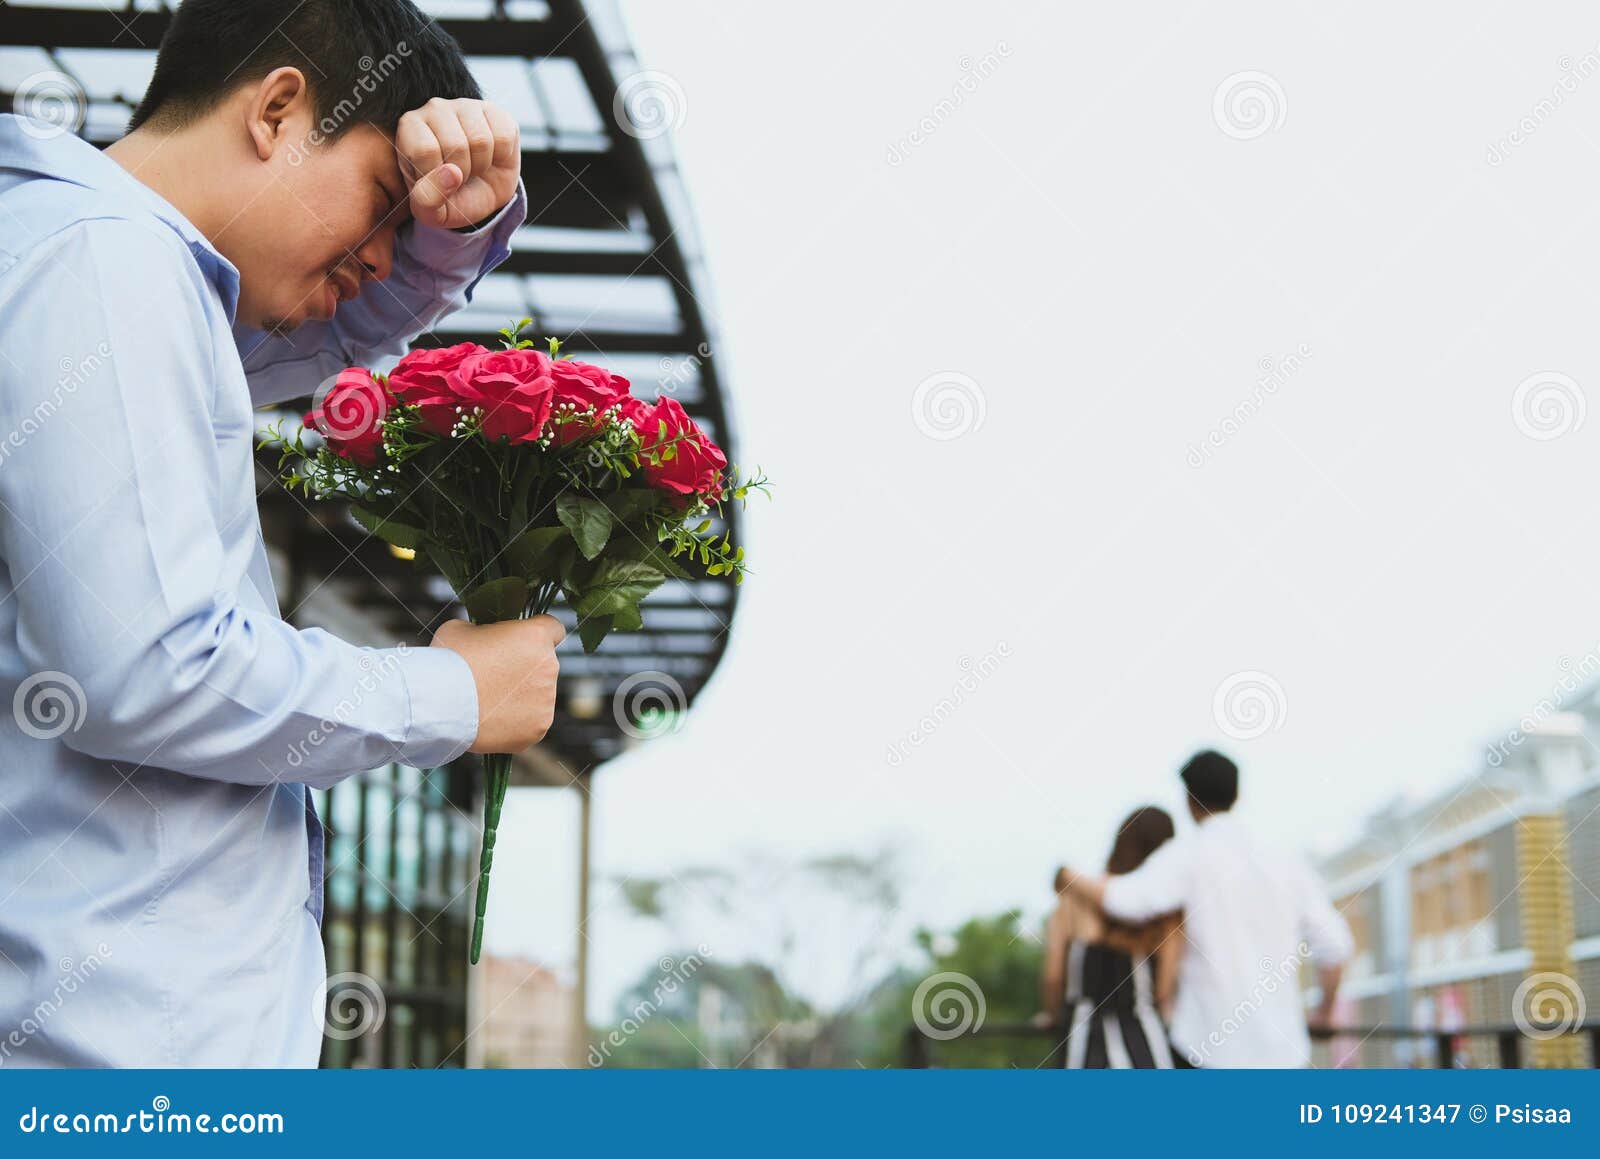 Heartbroken Man Holding Bouquet of Red Roses Feeling Sad while S ...